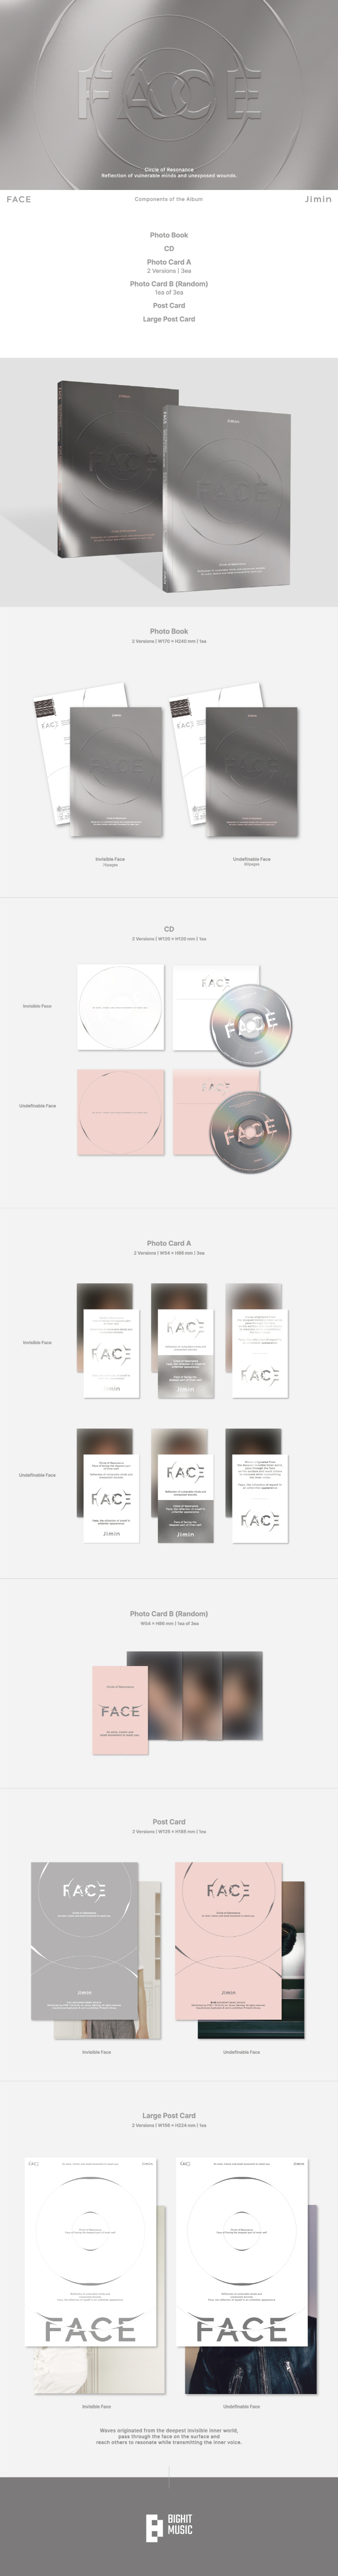 Jimin (BTS) - [Face] (Set) + [Face] (Weverse Albums ver) with weverse gift